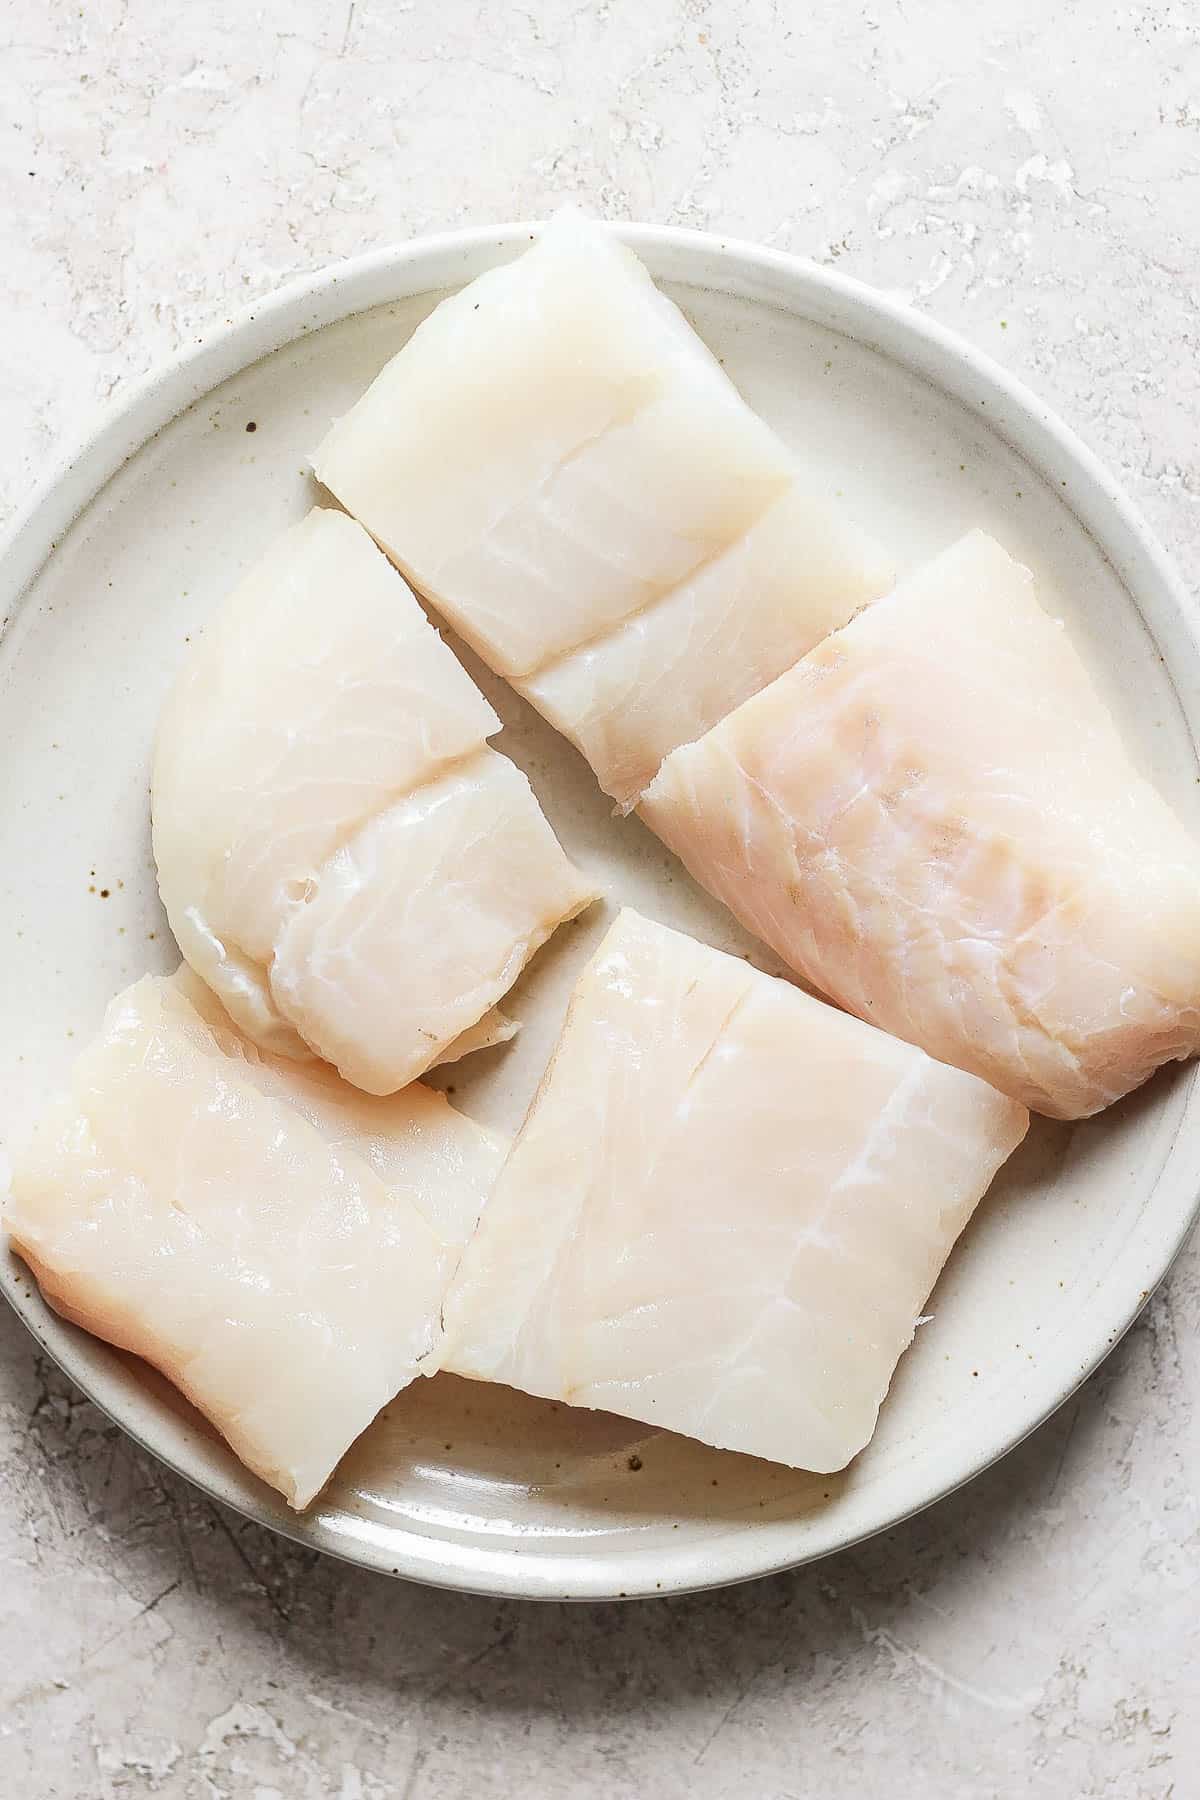 Large chunks of cod fillets on a large plate.